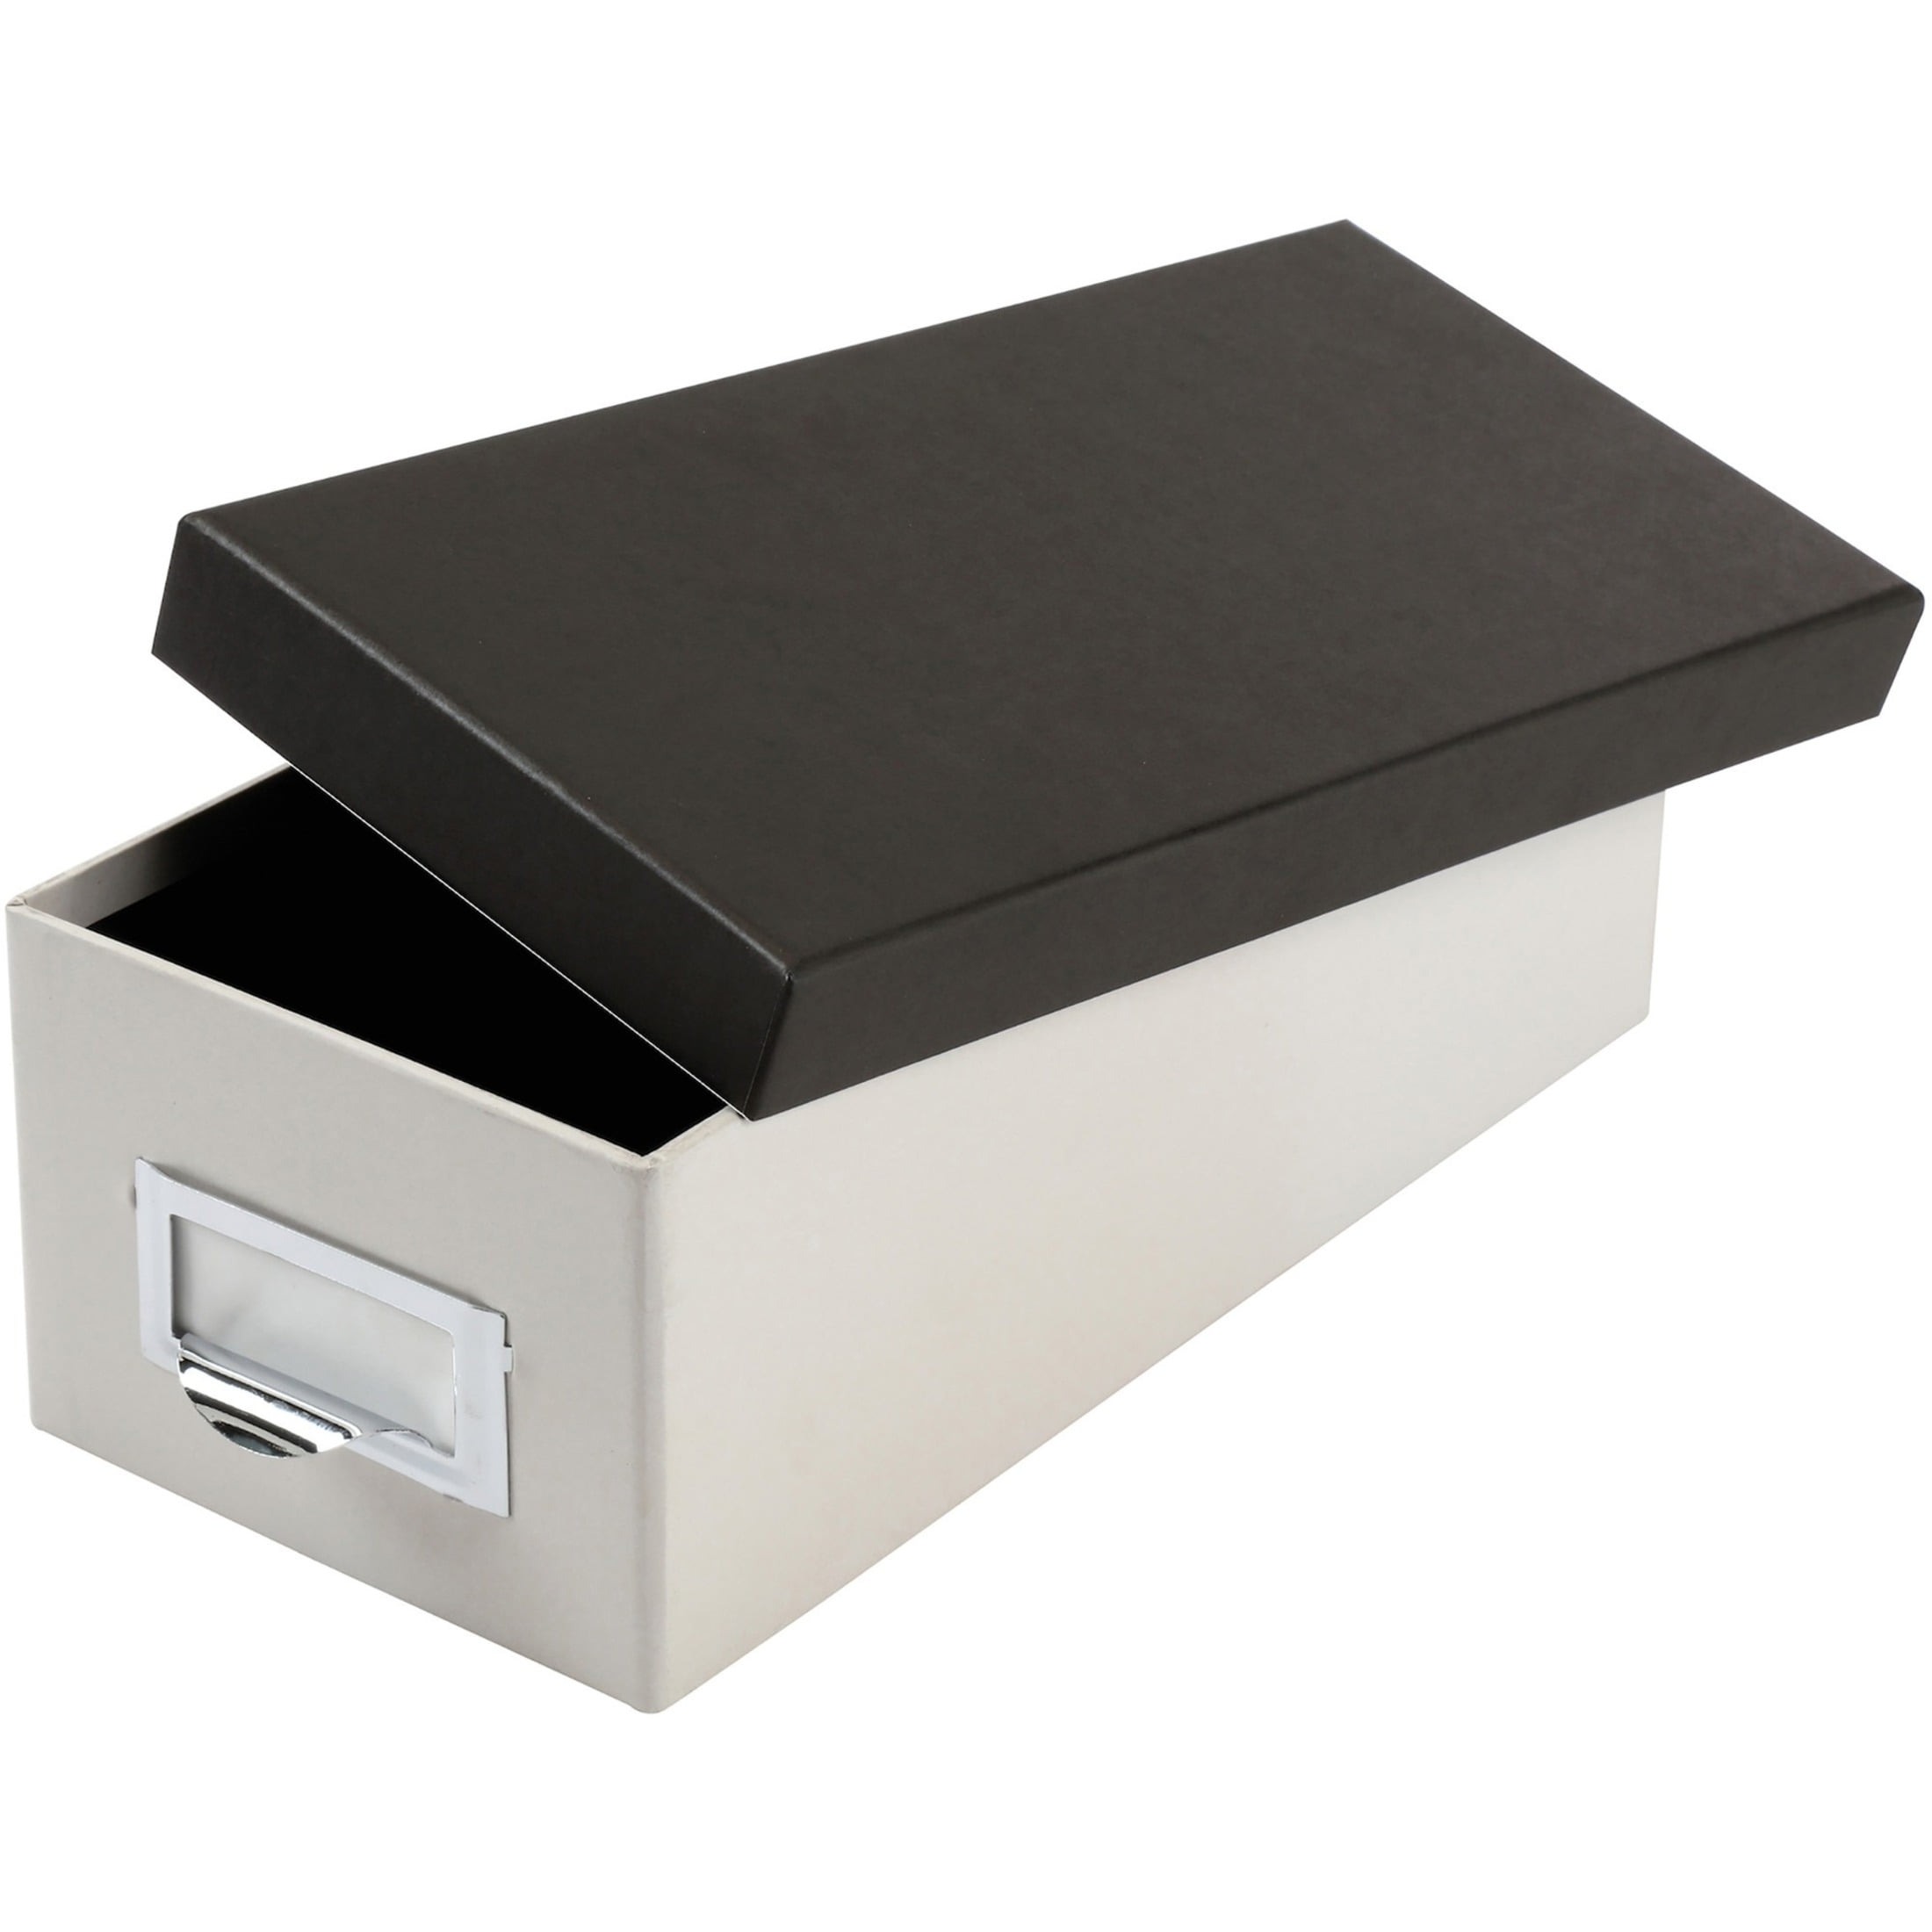 Black OXF01351 Oxford Index Card Flip Top File Box Holds 300 3 x 5 Cards 